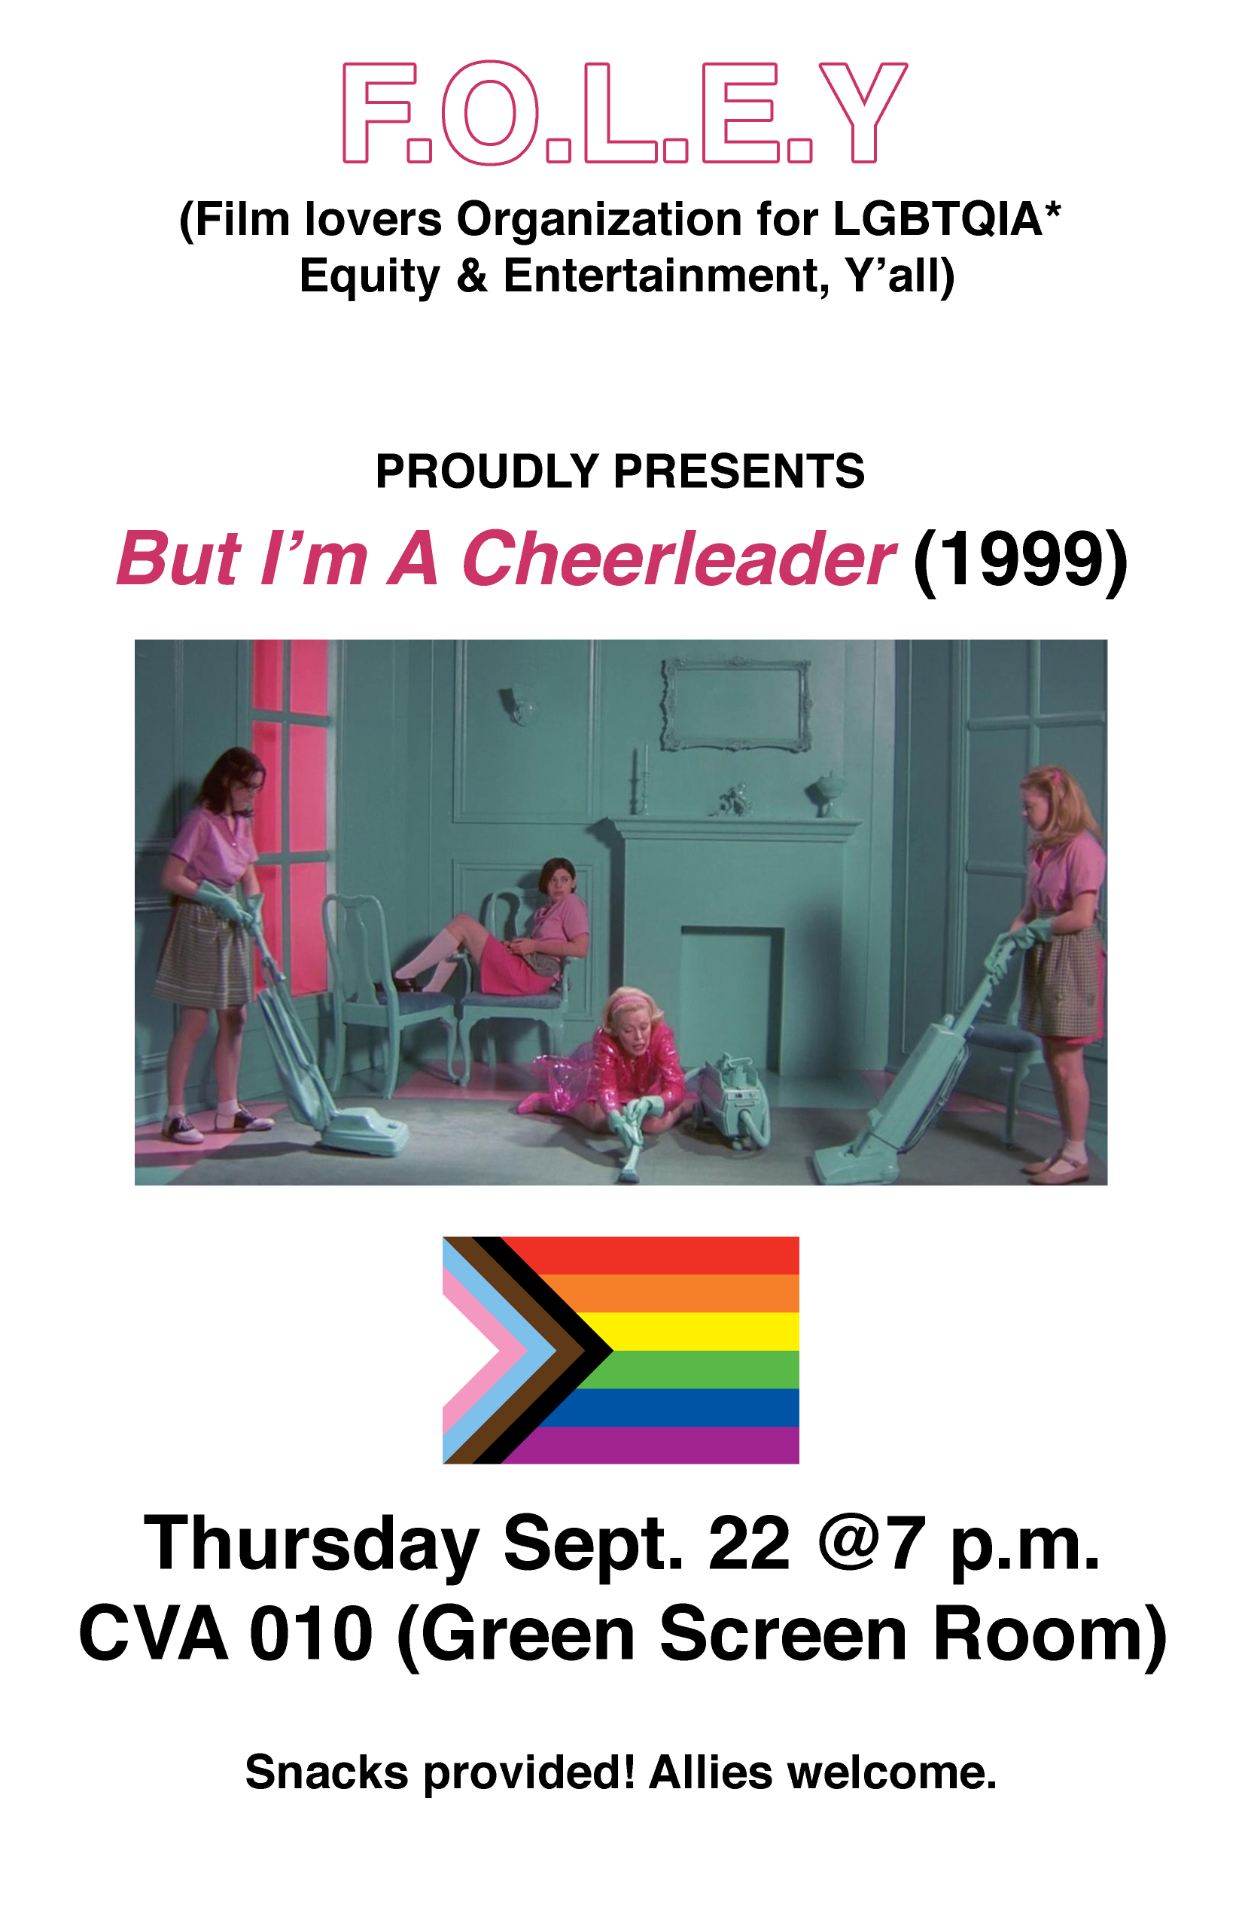 FOLEY Queer Film Screening of "But I'm a Cheerleader" with an image of the progress pride flag and a blue and pink movie still.